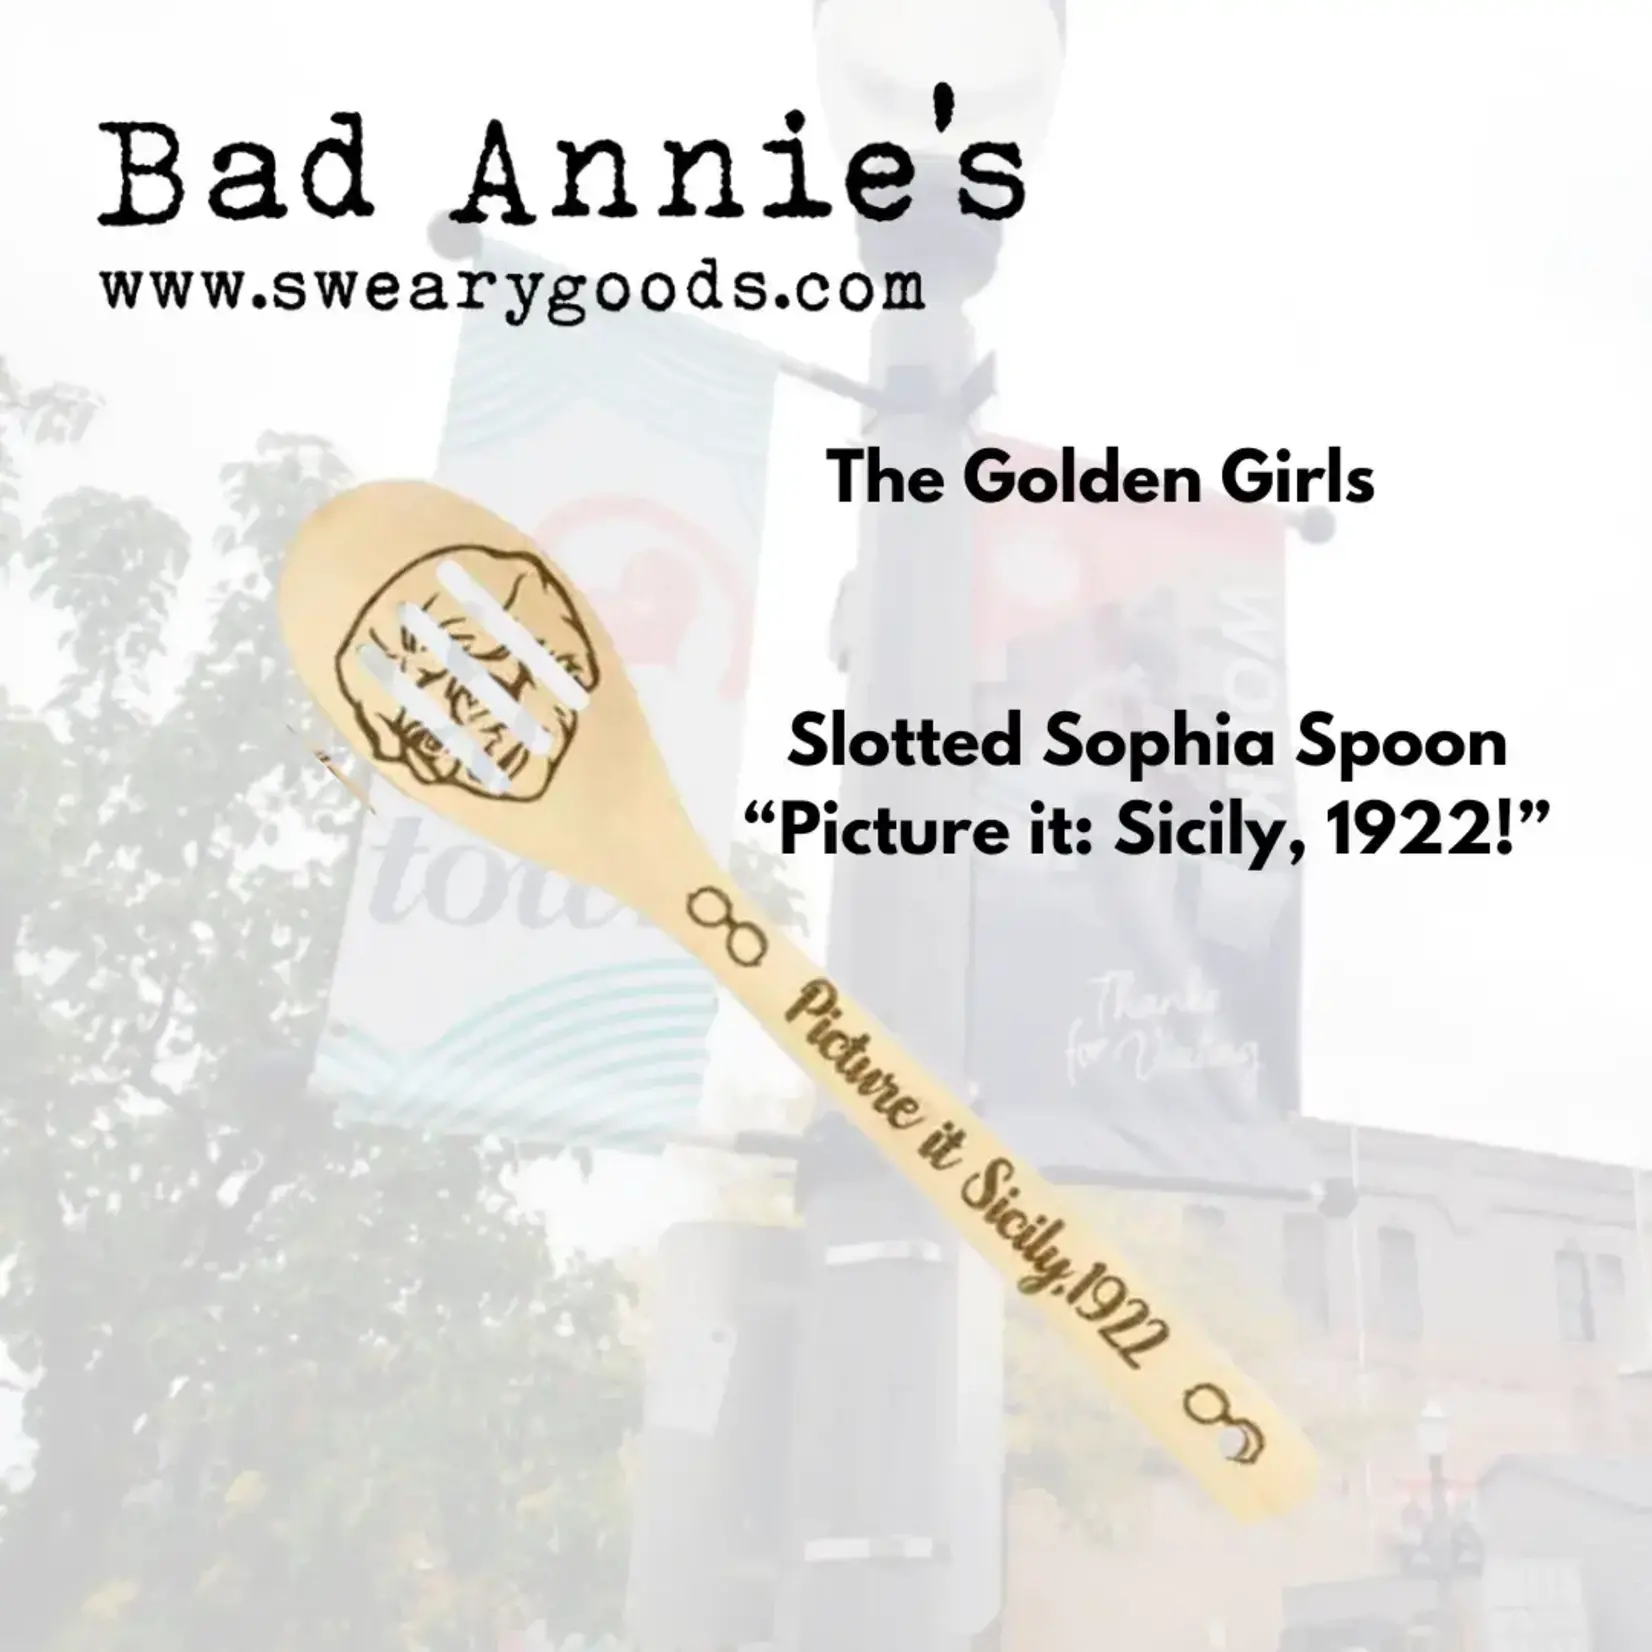 Wooden Slotted Sophia Spoon - Picture It: Sicily 1922 - Golden Girls